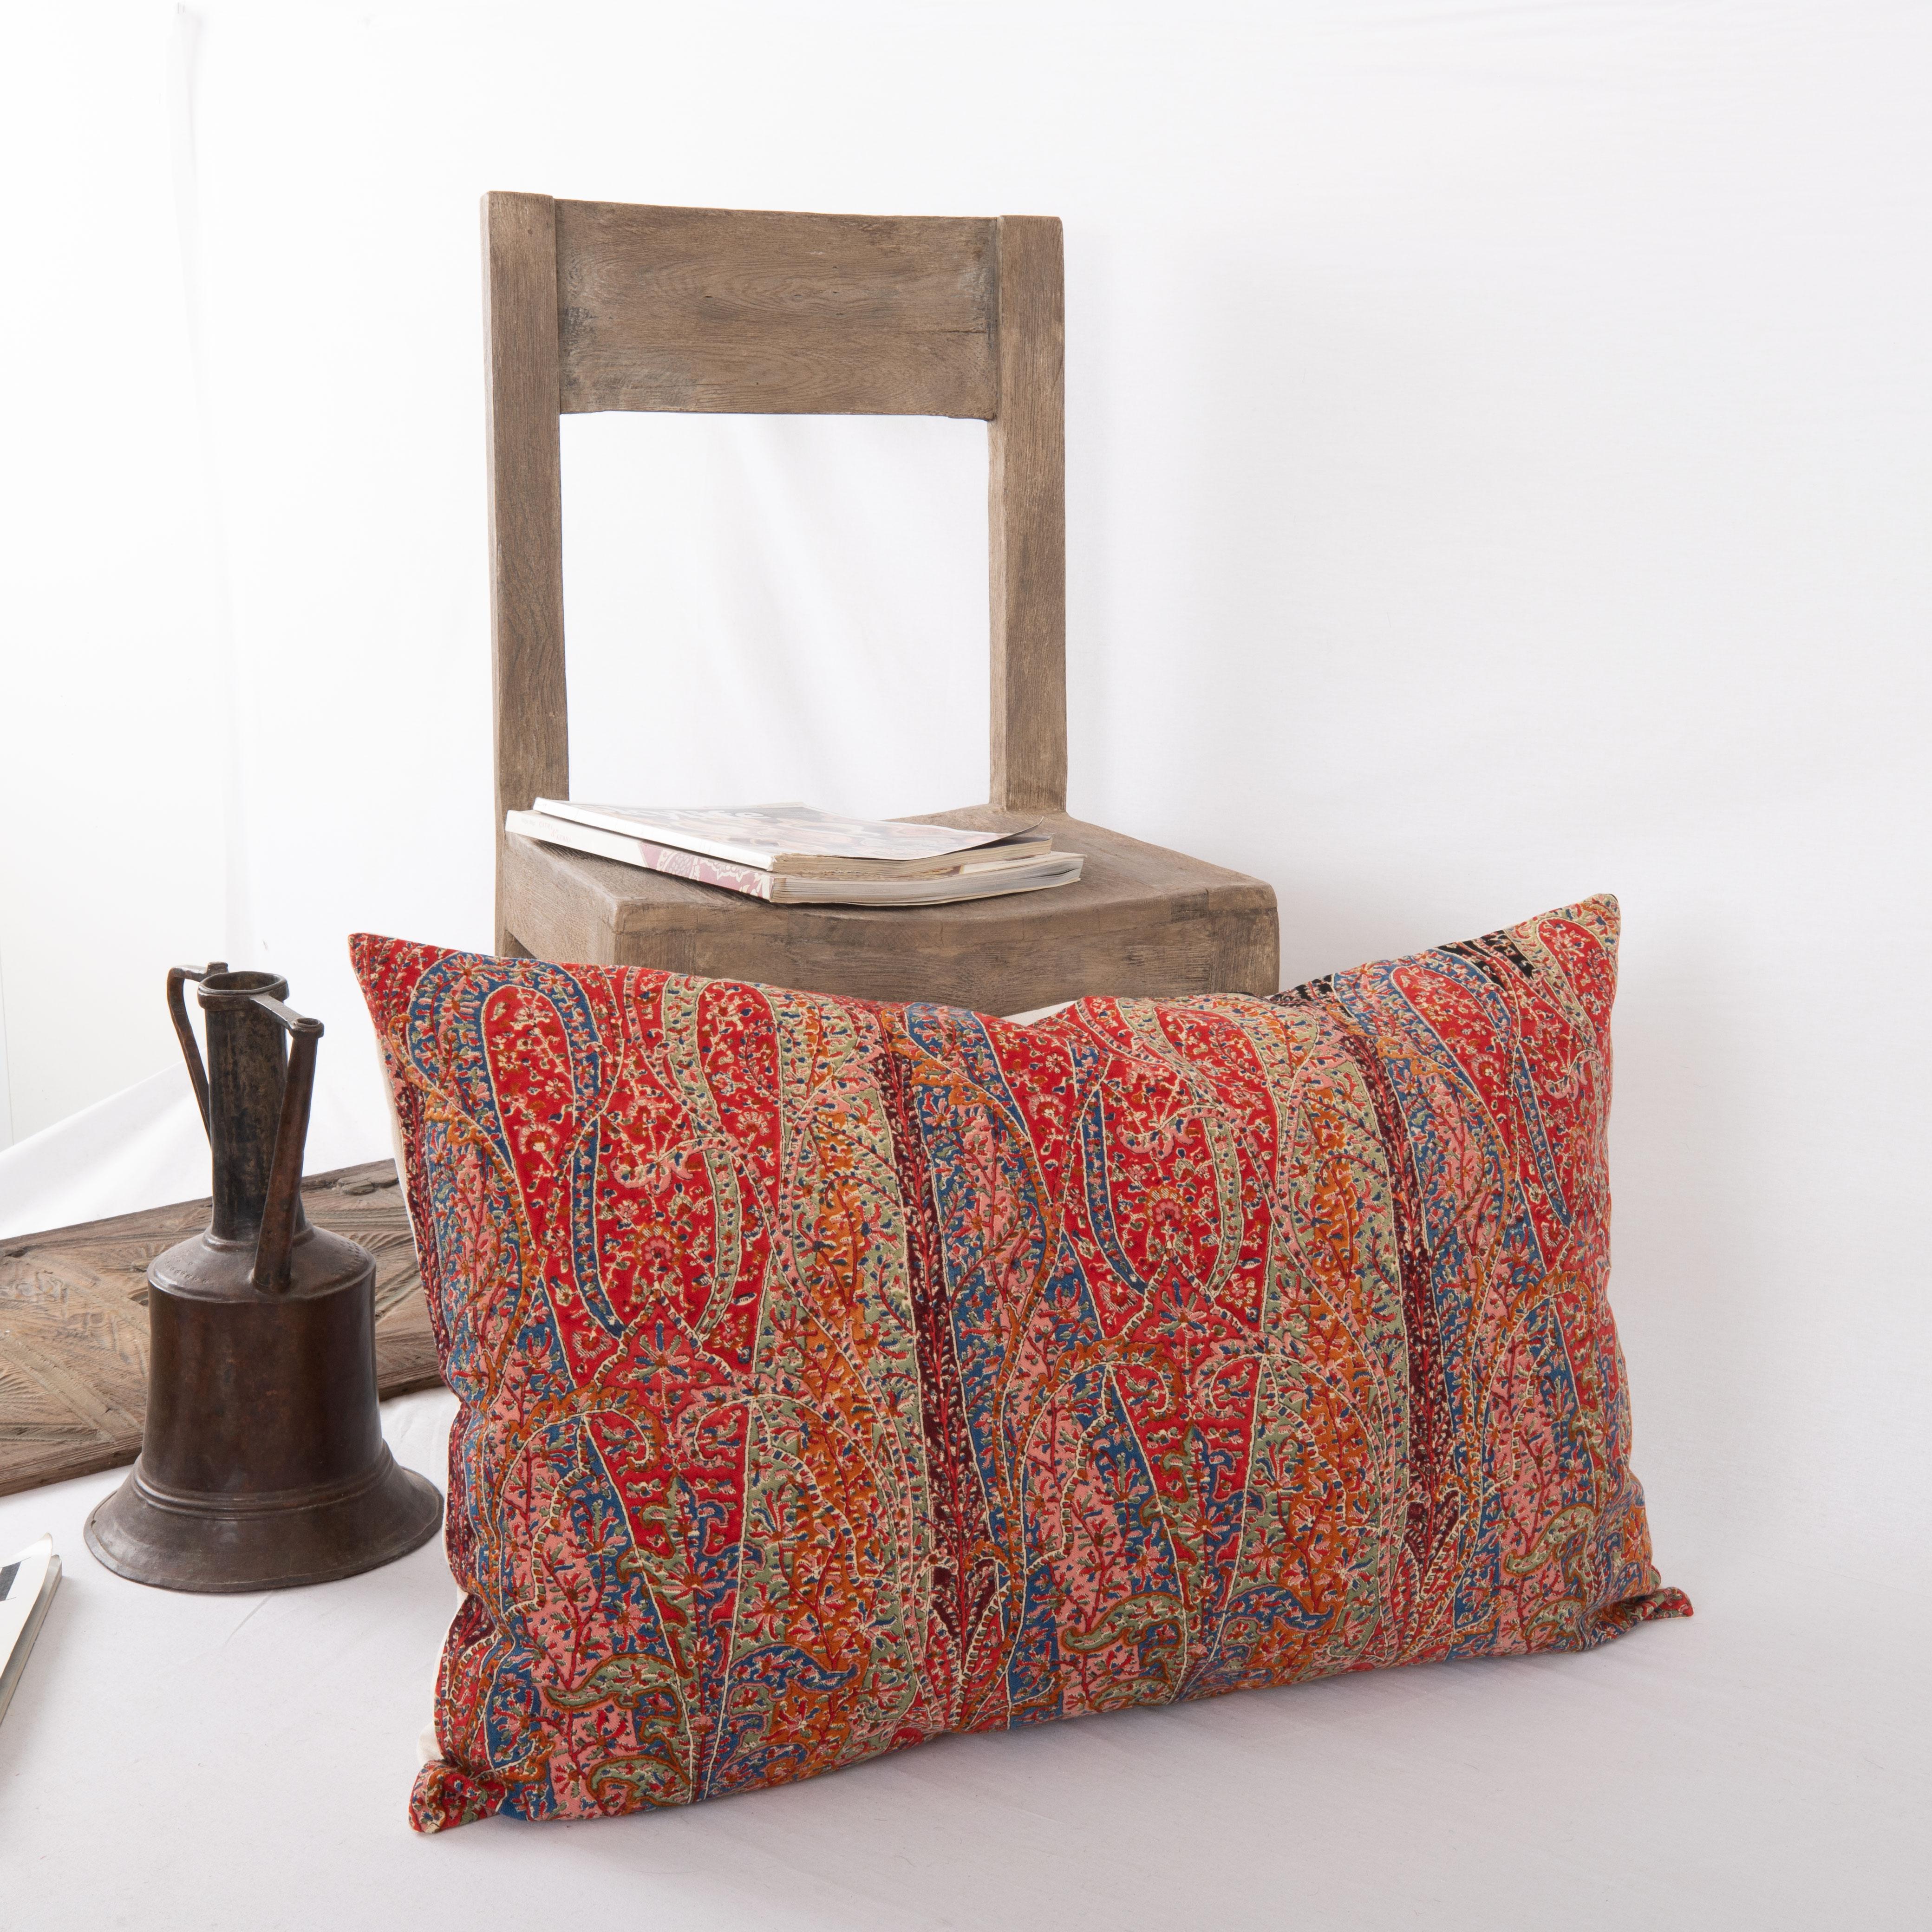 Wool Pillow Cover Made from a an Antique Printed Scottish Paisley Shawl    For Sale